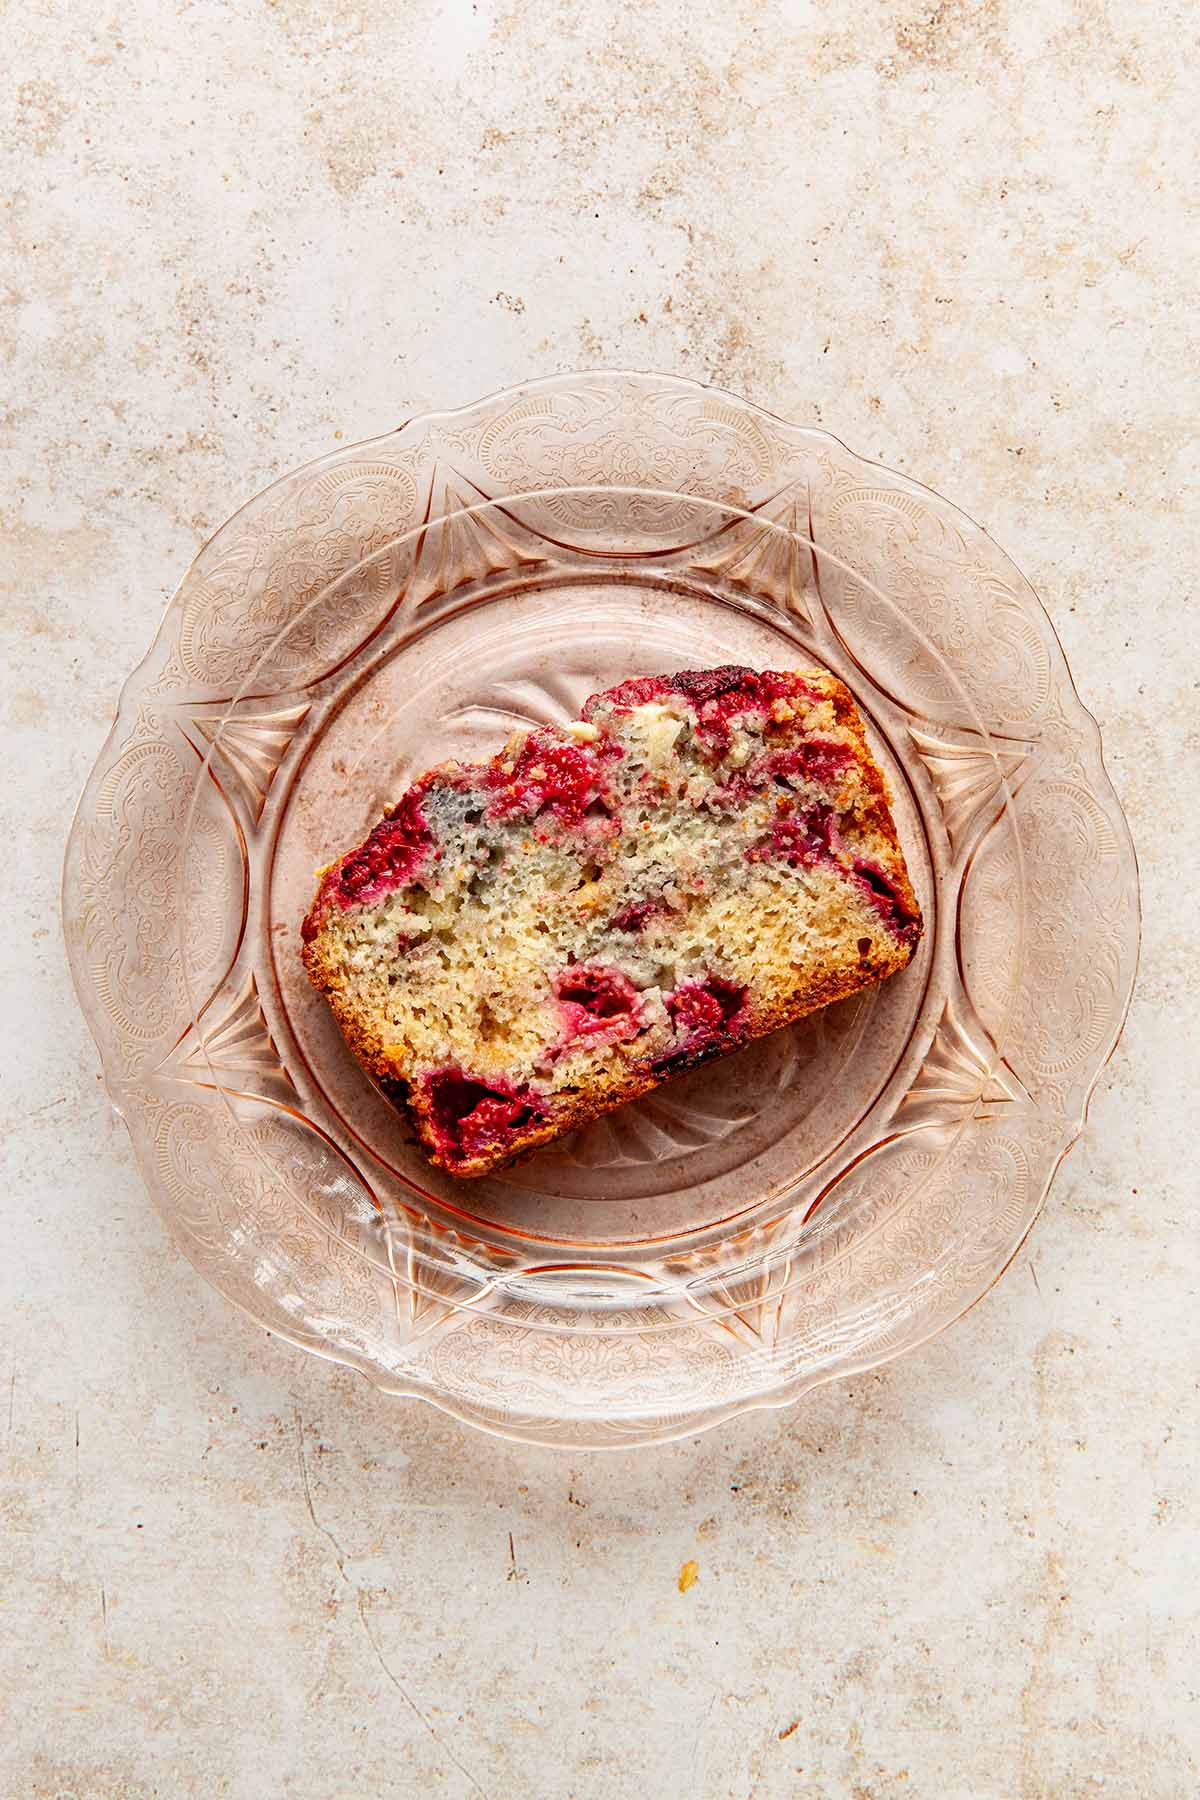 A slice of raspberry and white chocolate loaf cake on a pink Depression glass plate.